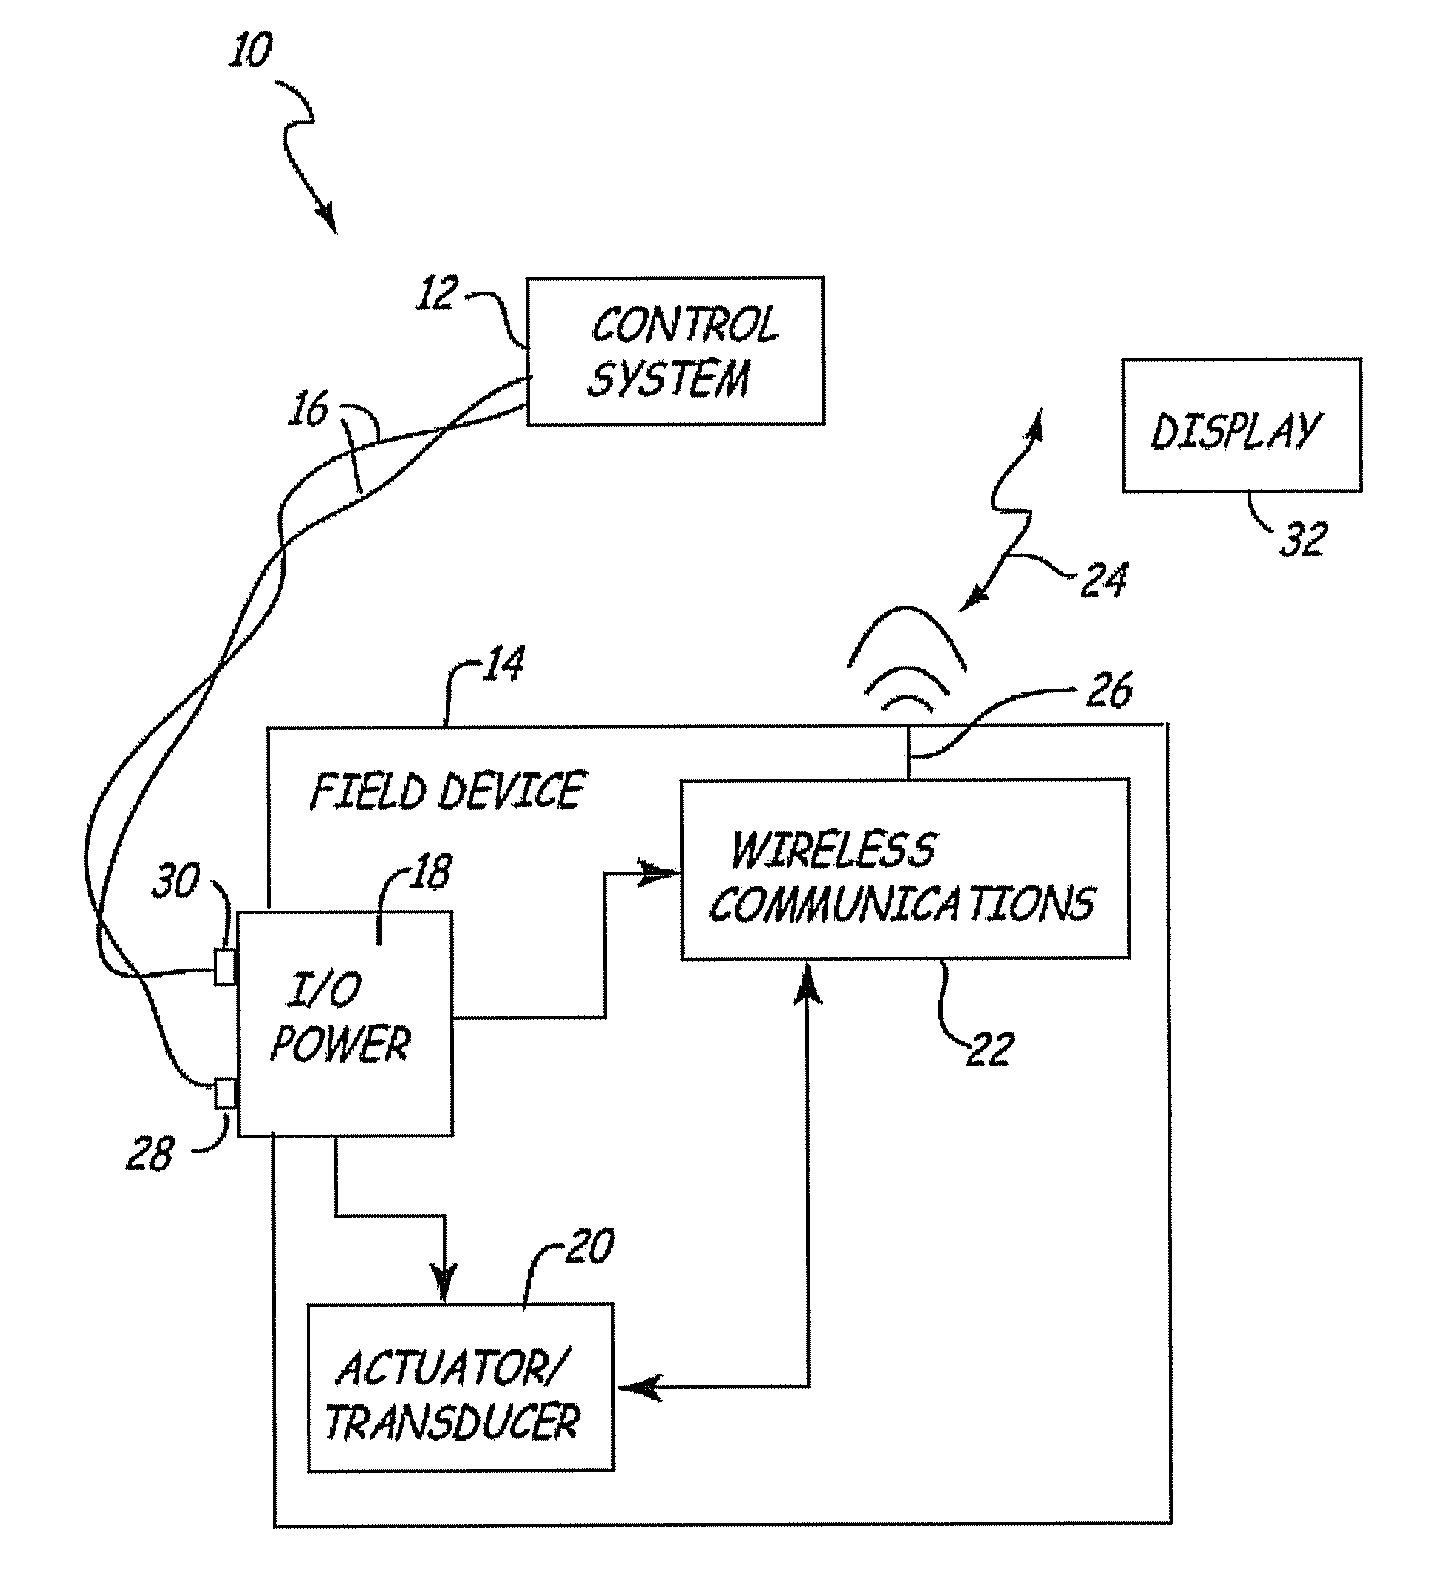 RF adapter for field device with low voltage intrinsic safety clamping